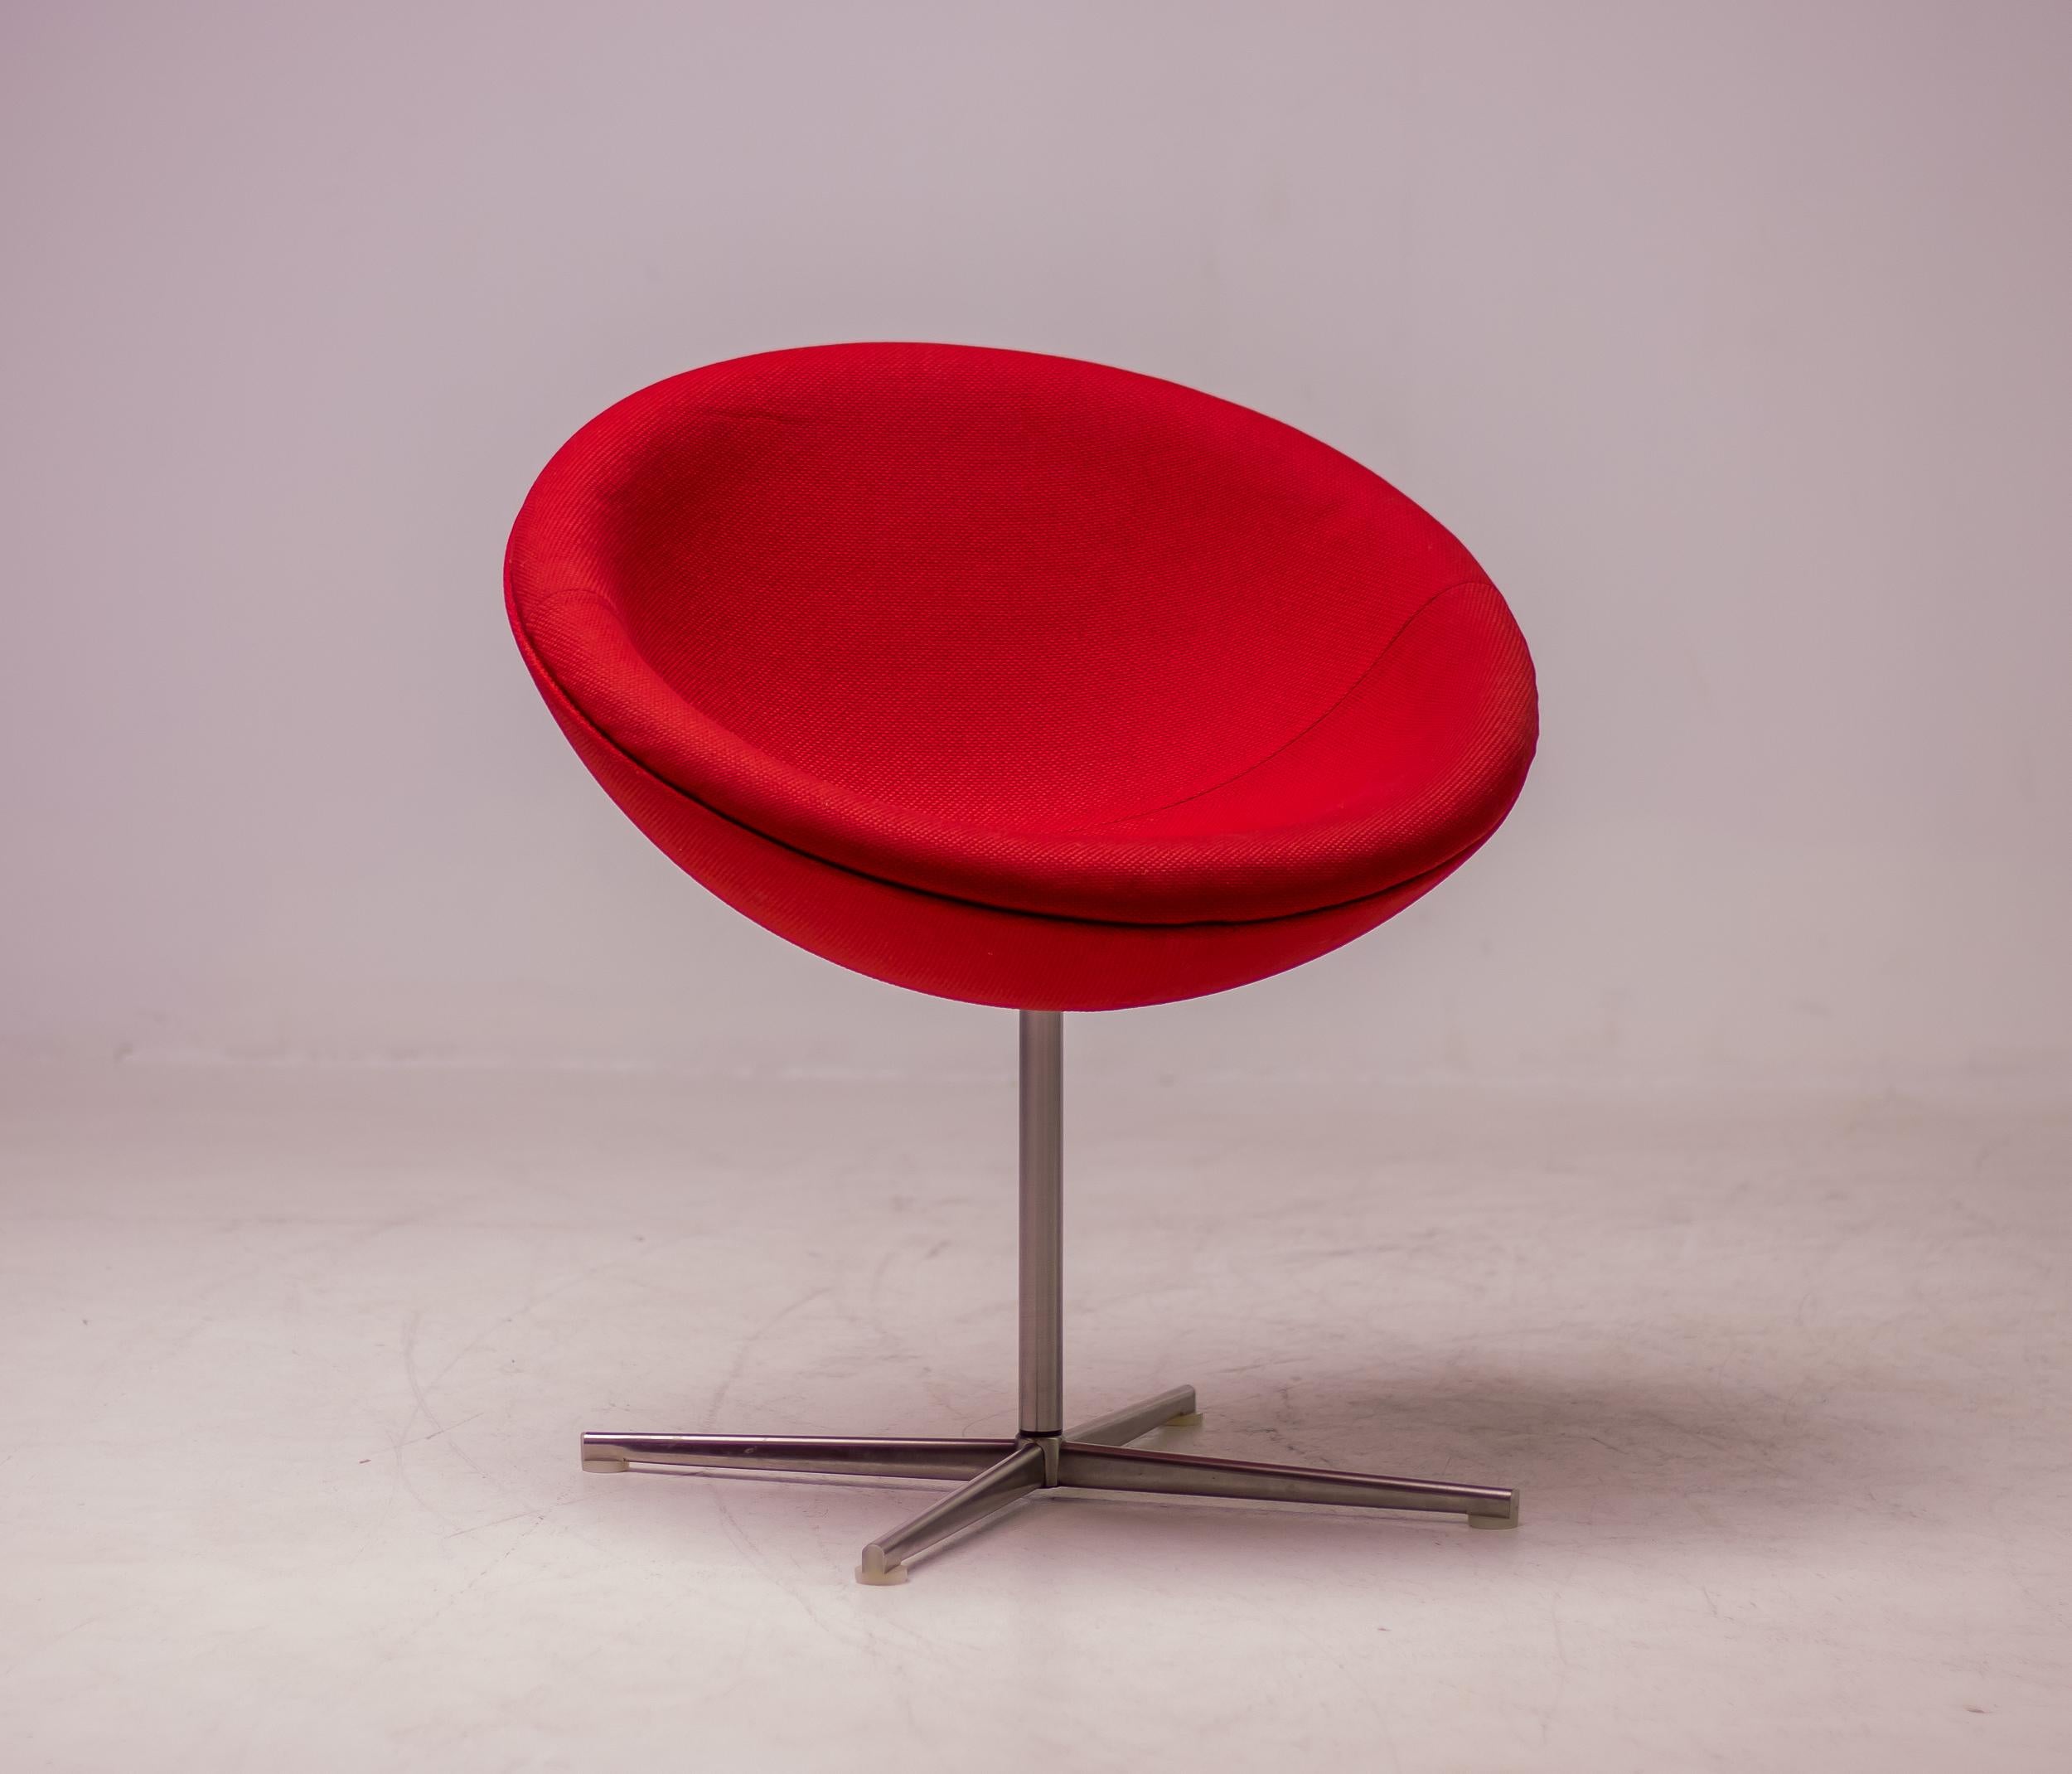 Stainless Steel Verner Panton C1 Chairs For Sale